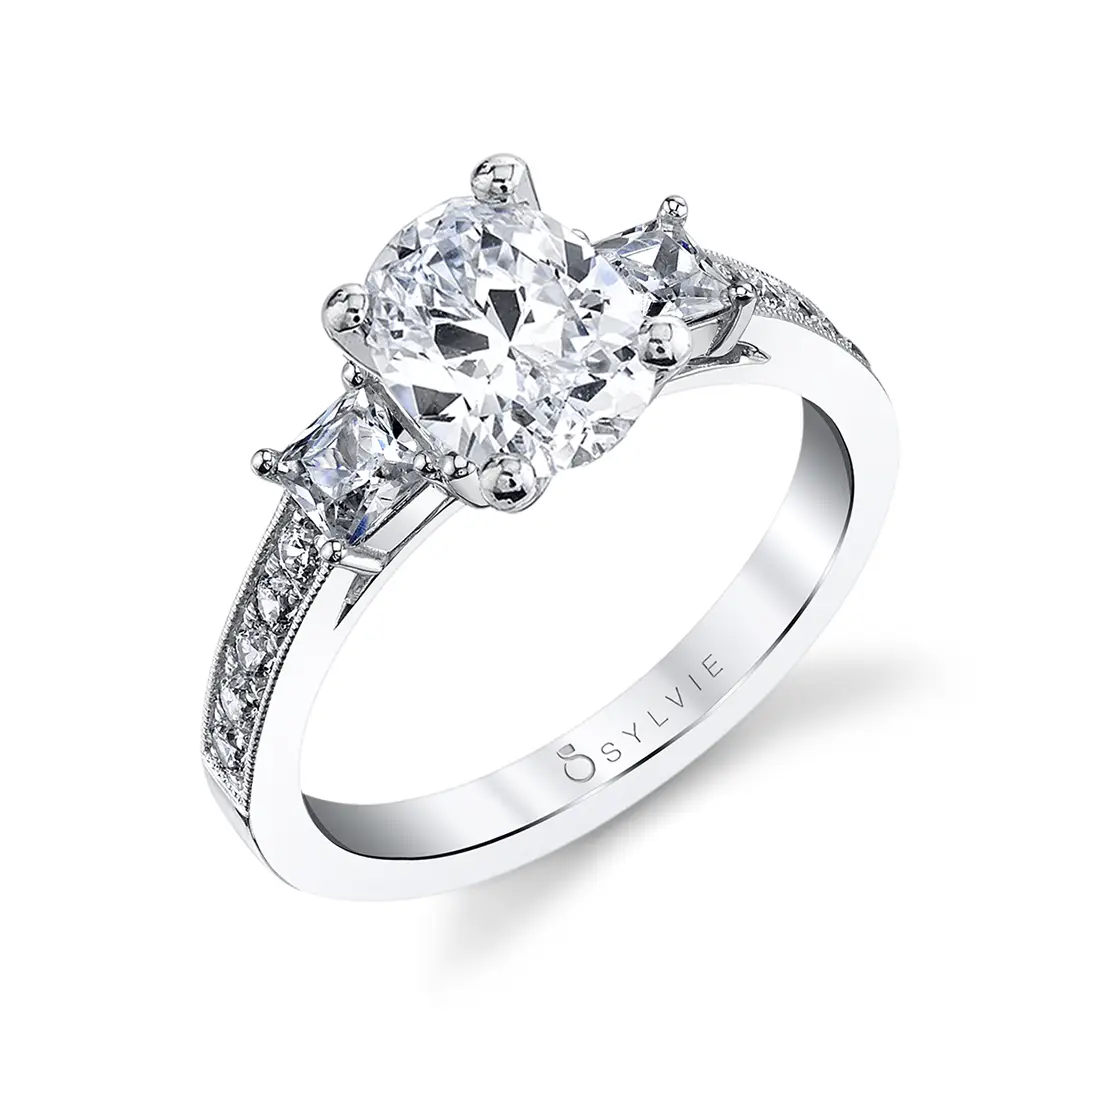 3 stone oval engagement ring princess side stones in white gold